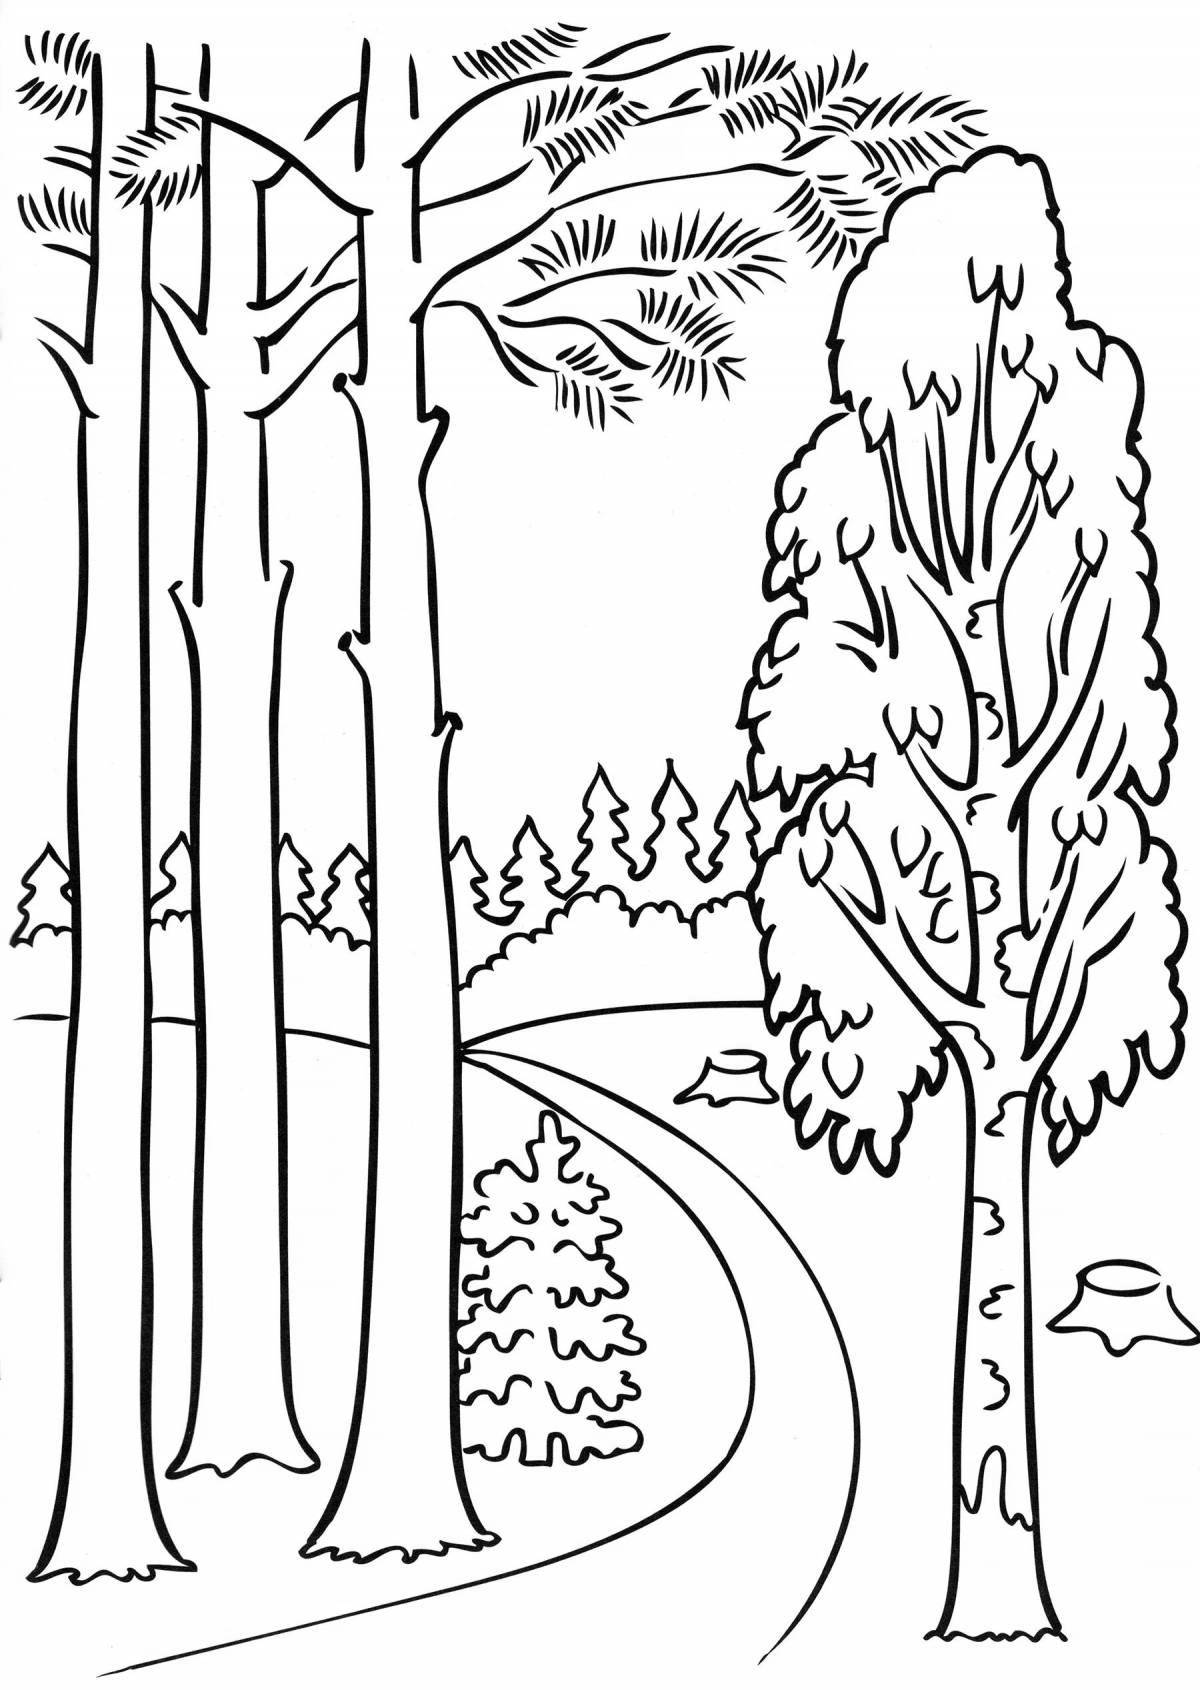 Refreshing pine forest coloring page